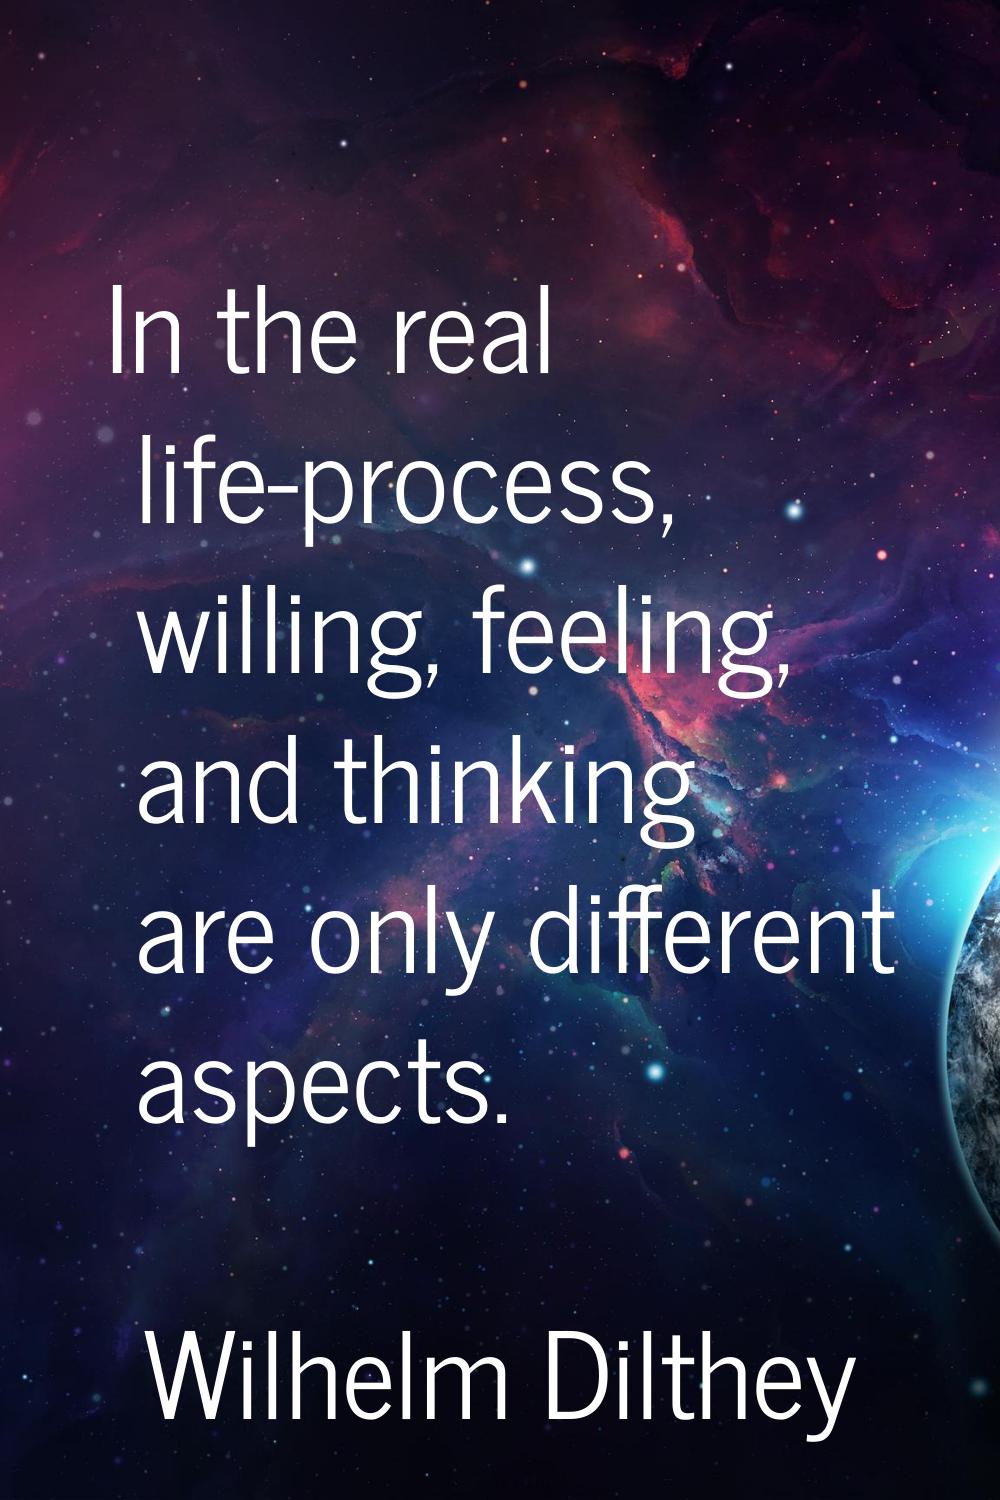 In the real life-process, willing, feeling, and thinking are only different aspects.